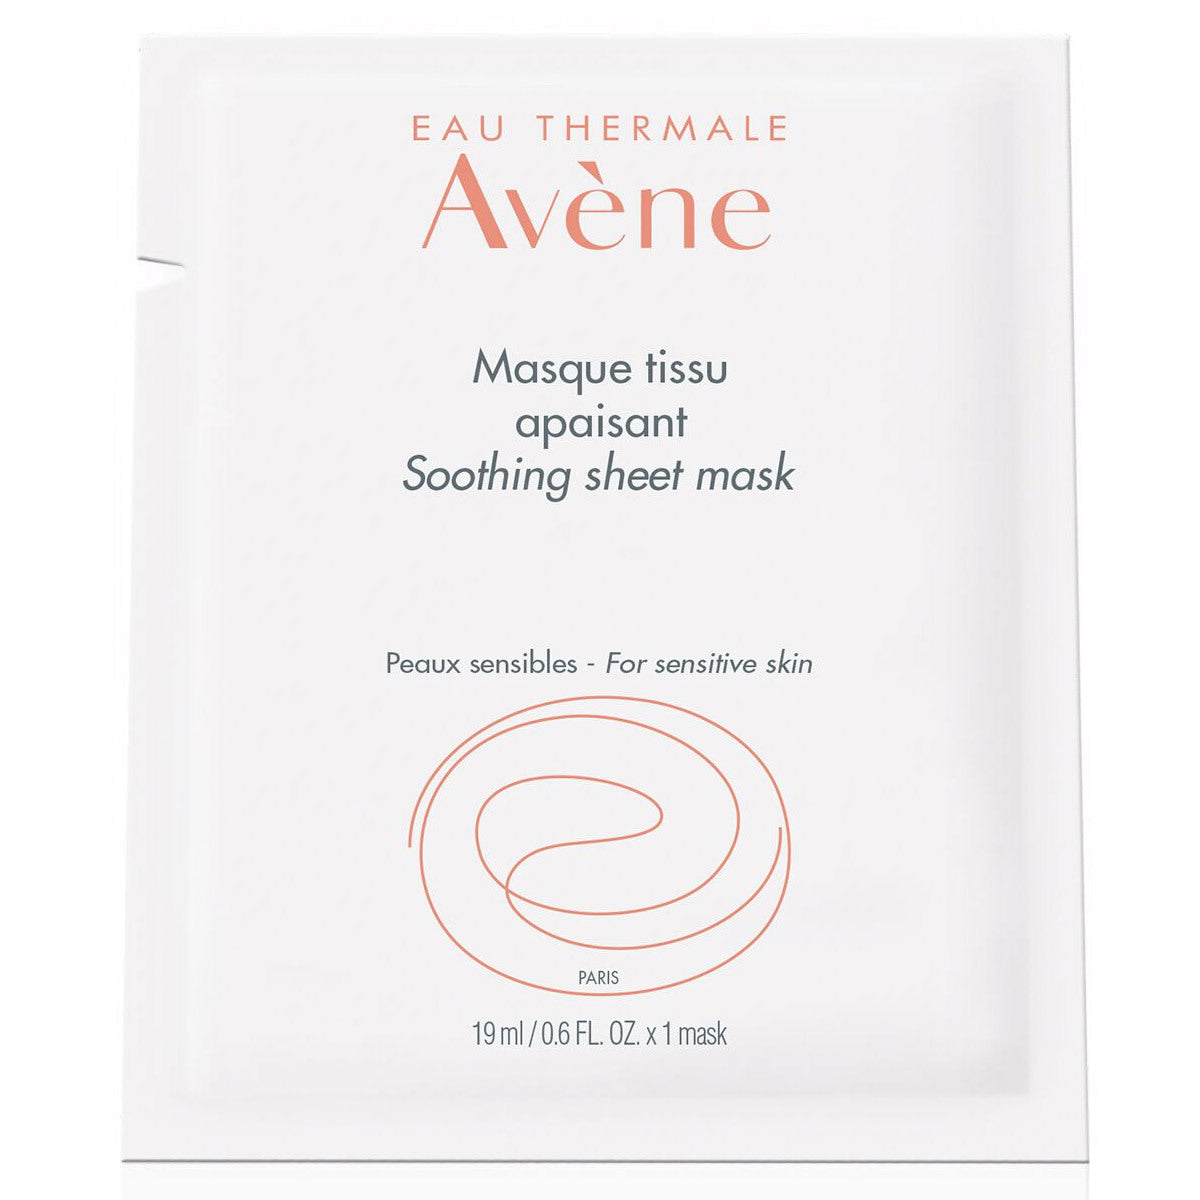 Primary image of Soothing Sheet Mask